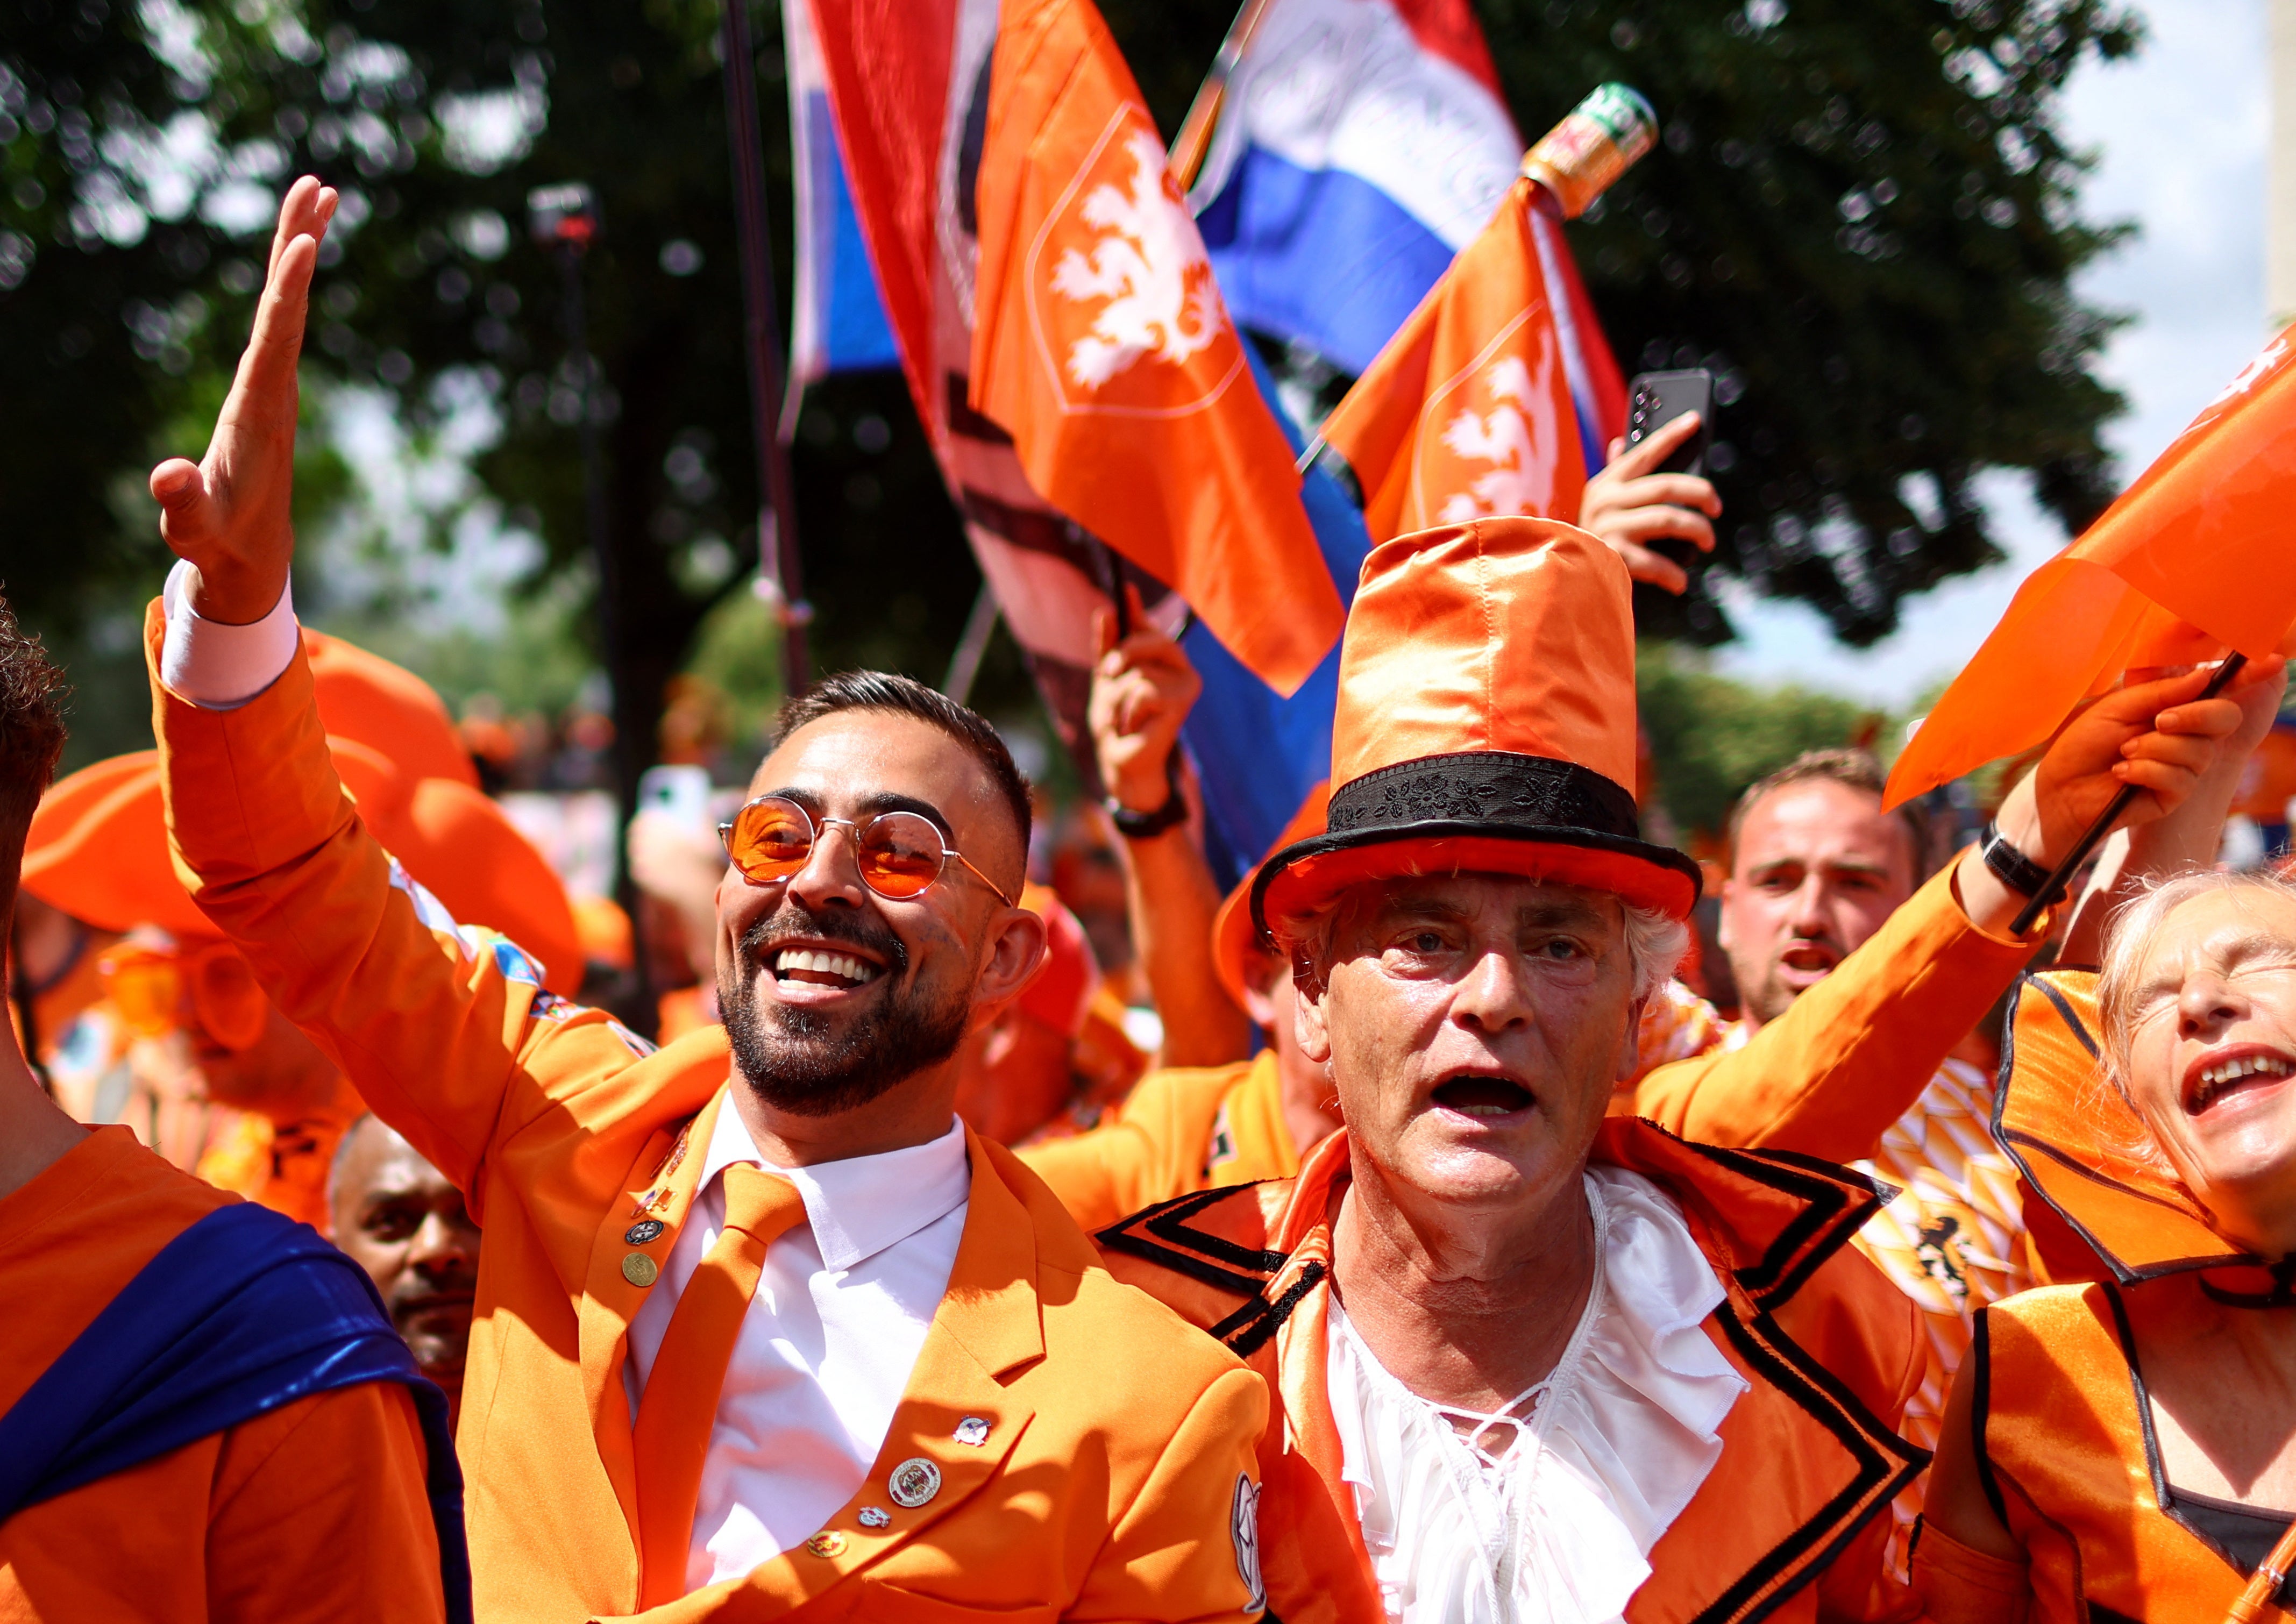 Netherlands fans gear up for kick-off with Romania